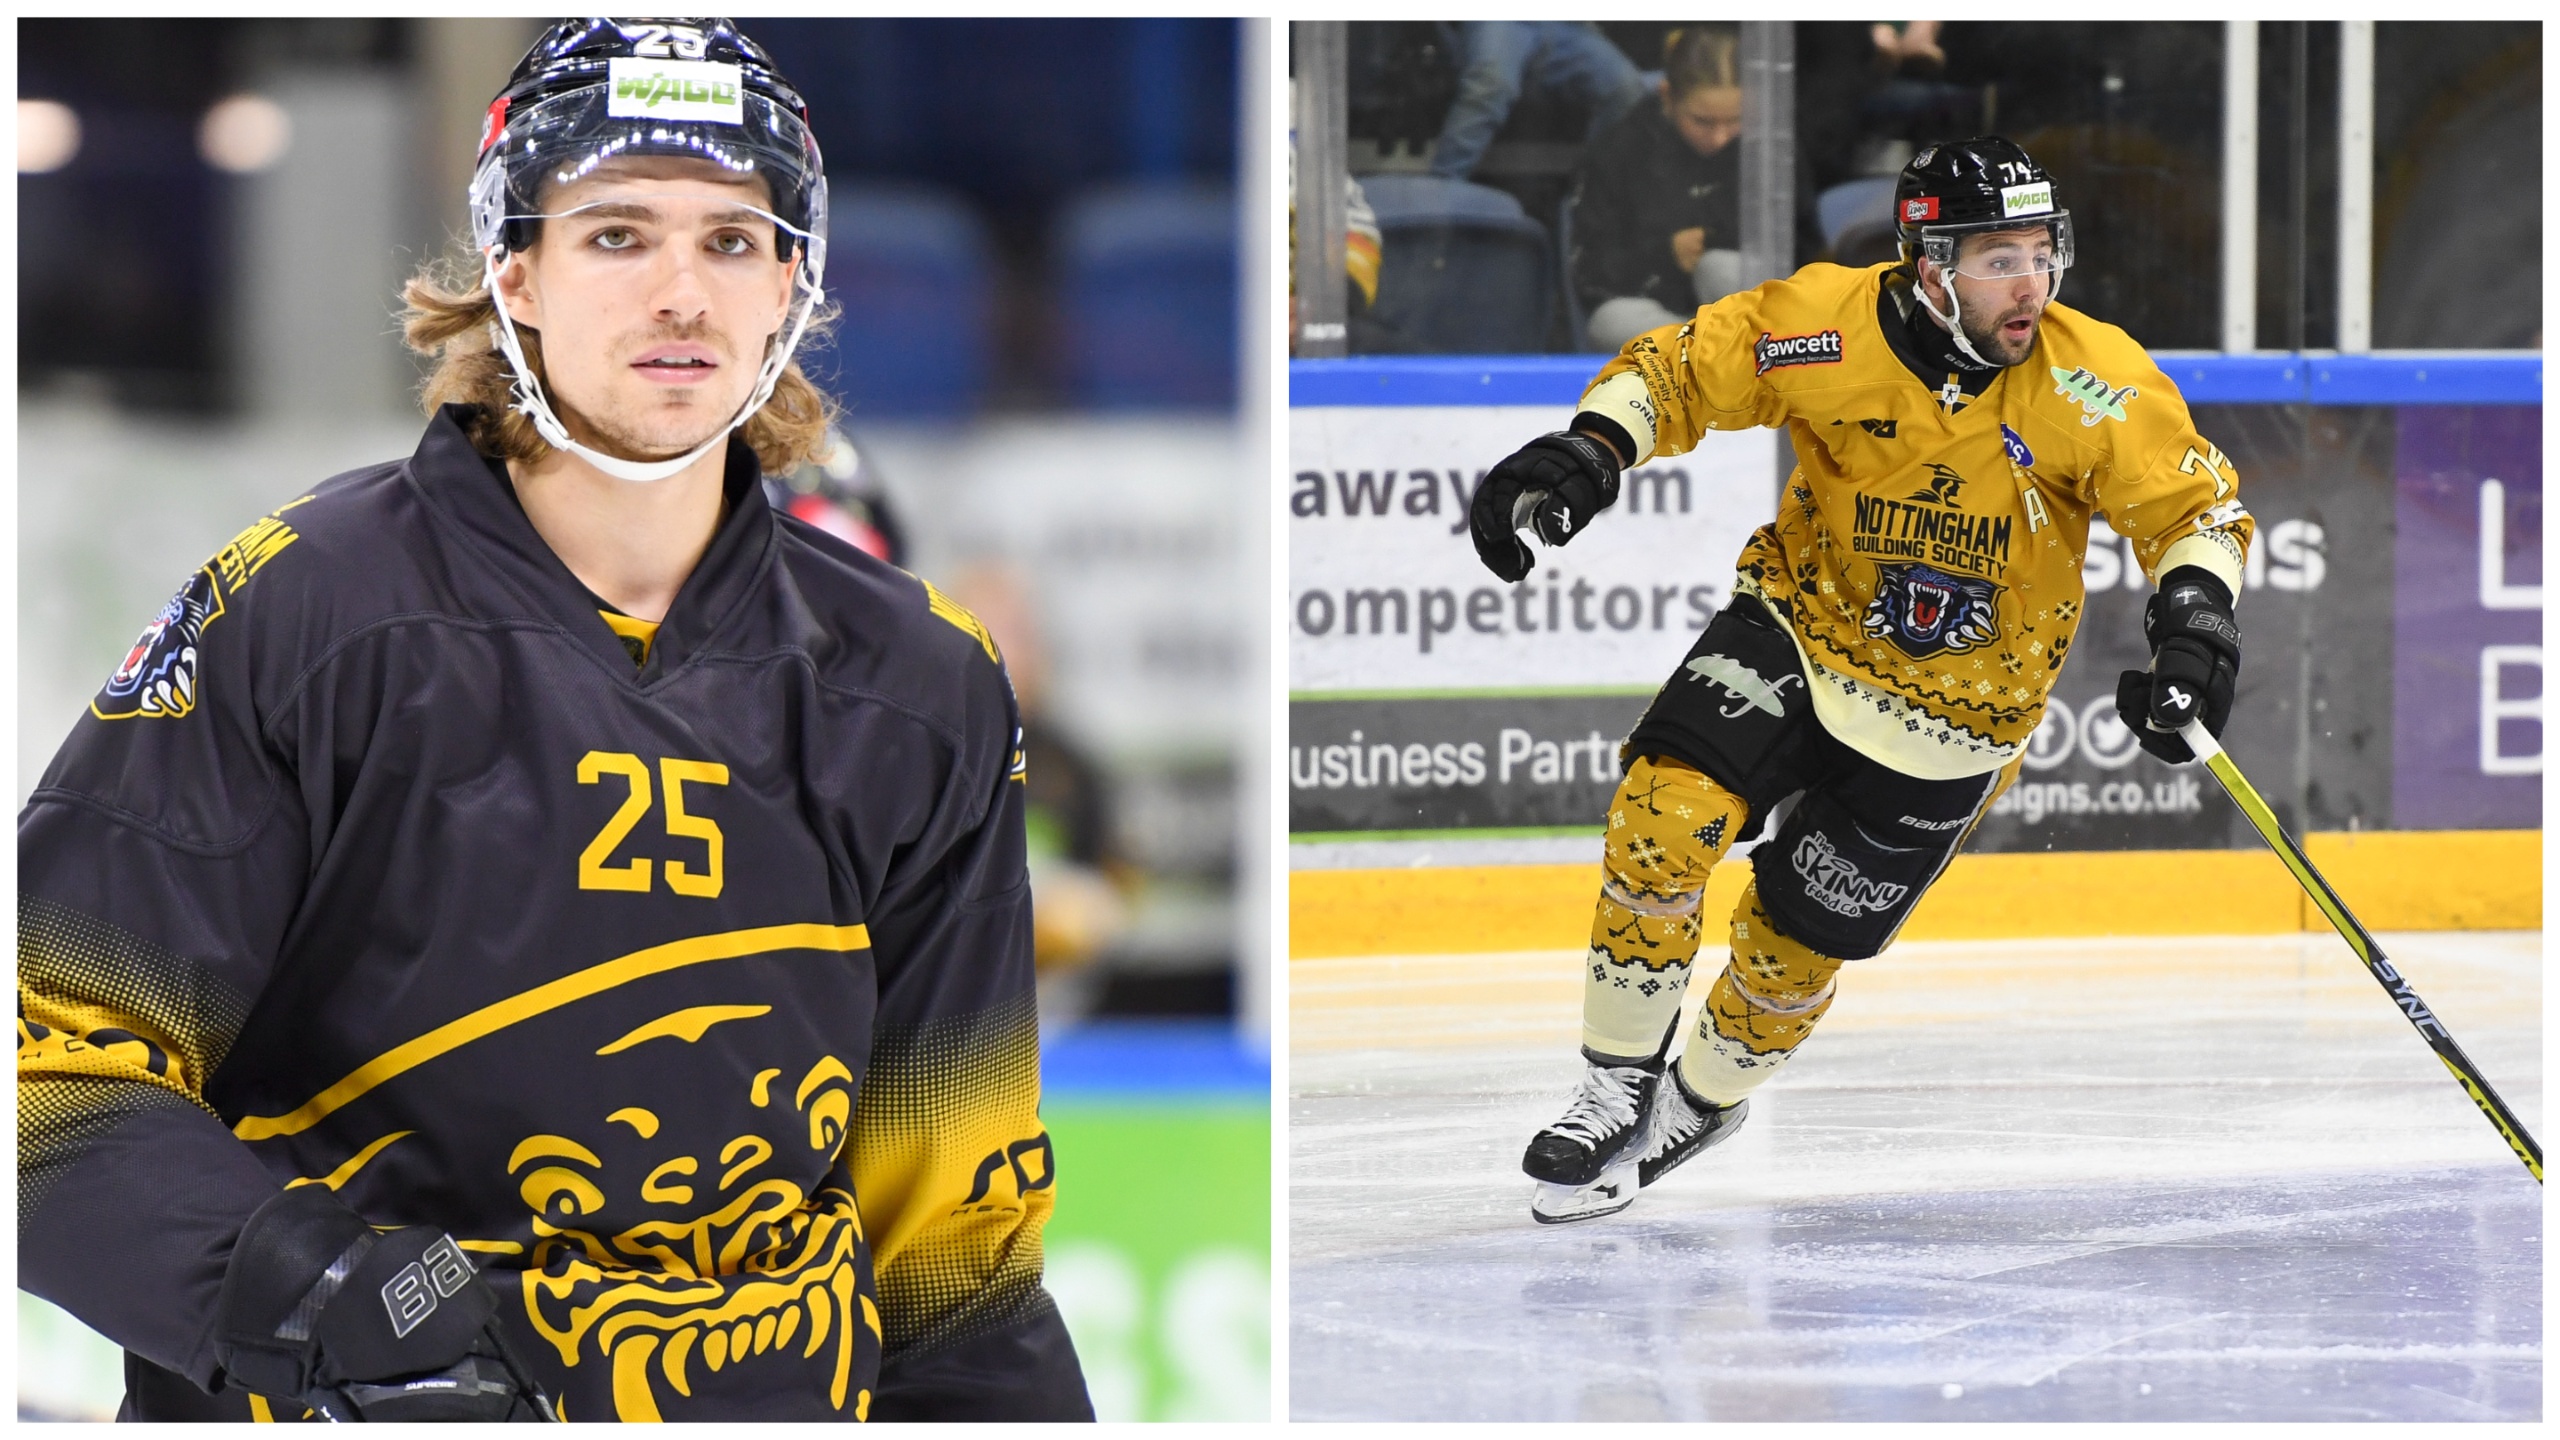 TETLOW AND BETTERIDGE NAMED IN GB SQUAD Top Image